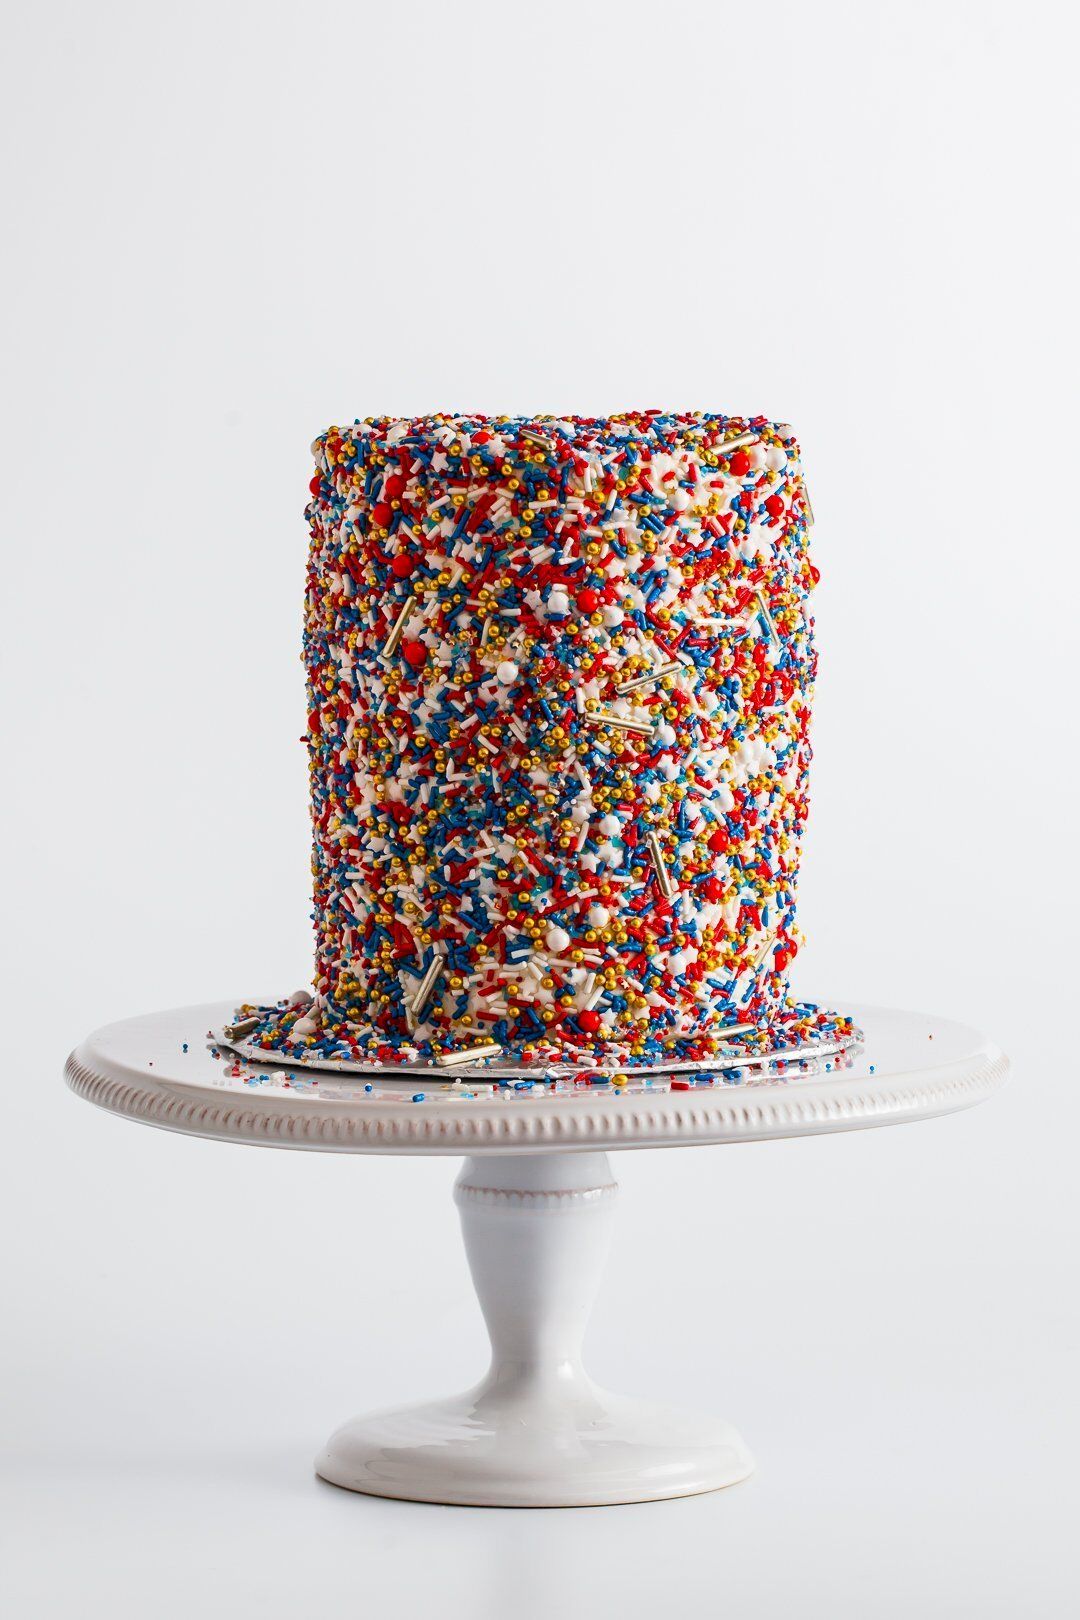 How to Make a Sprinkle Cake | Cupcake Project